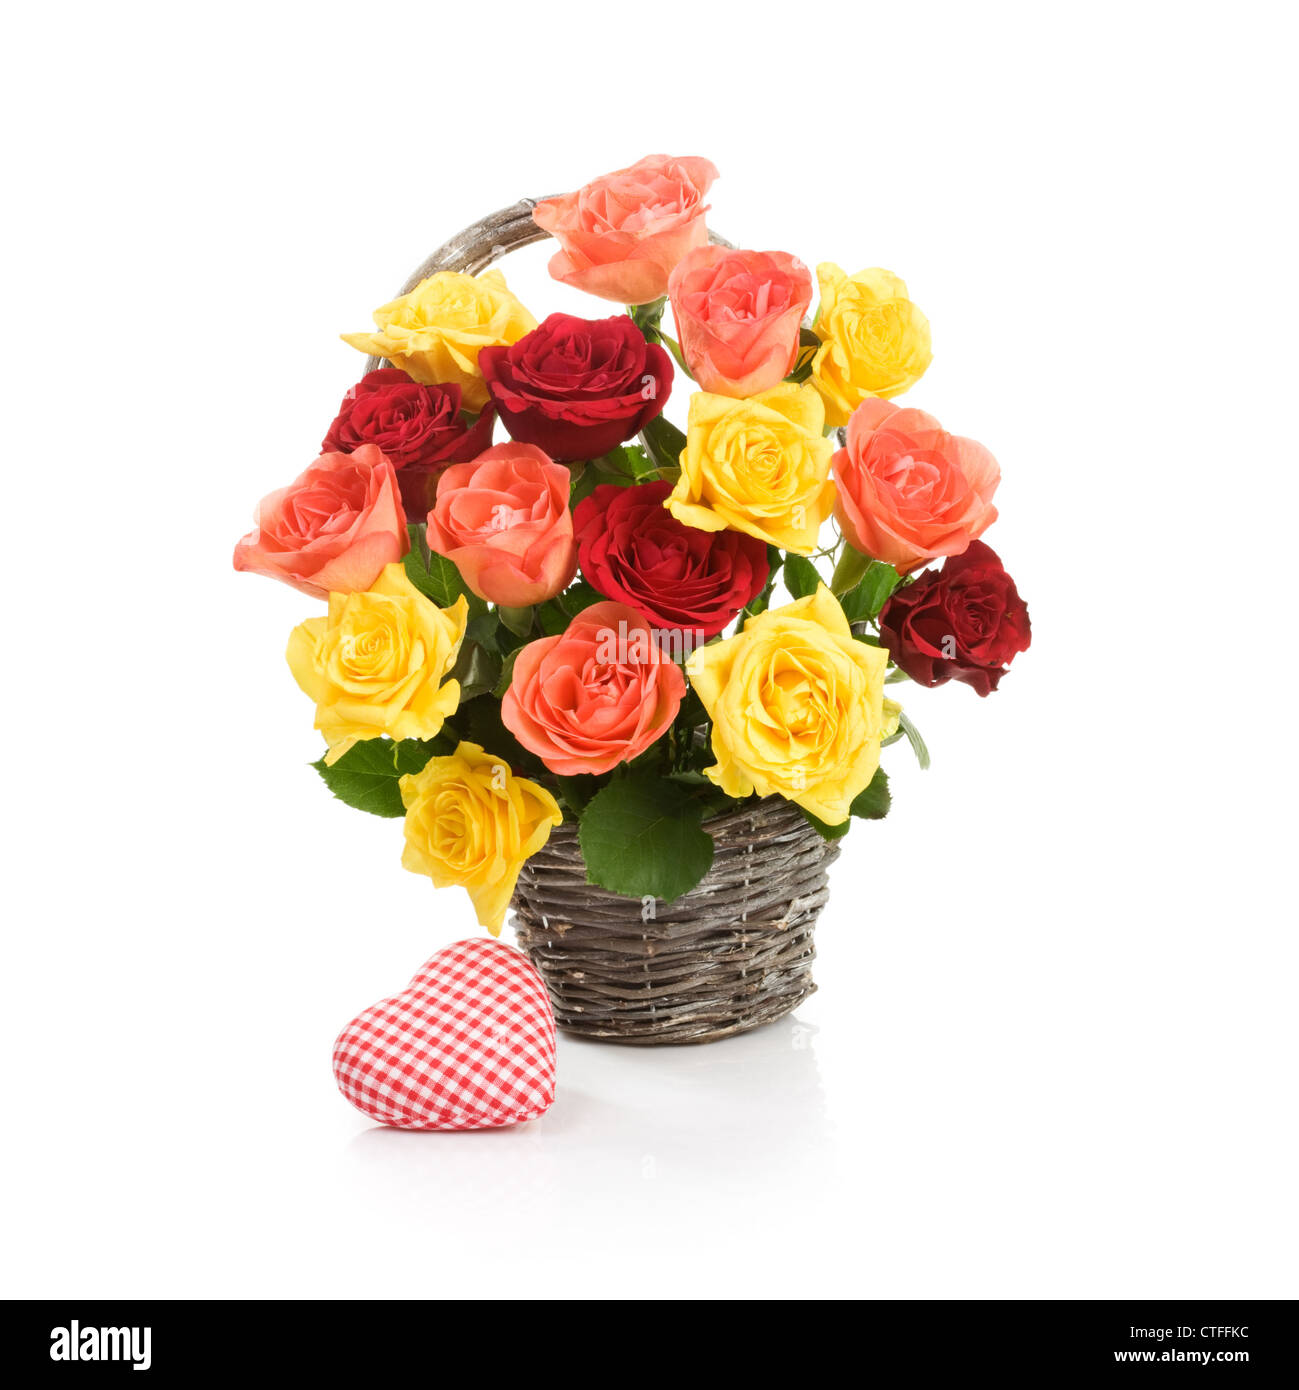 Basket with fresh colorful roses and fabric heart on white background Stock Photo